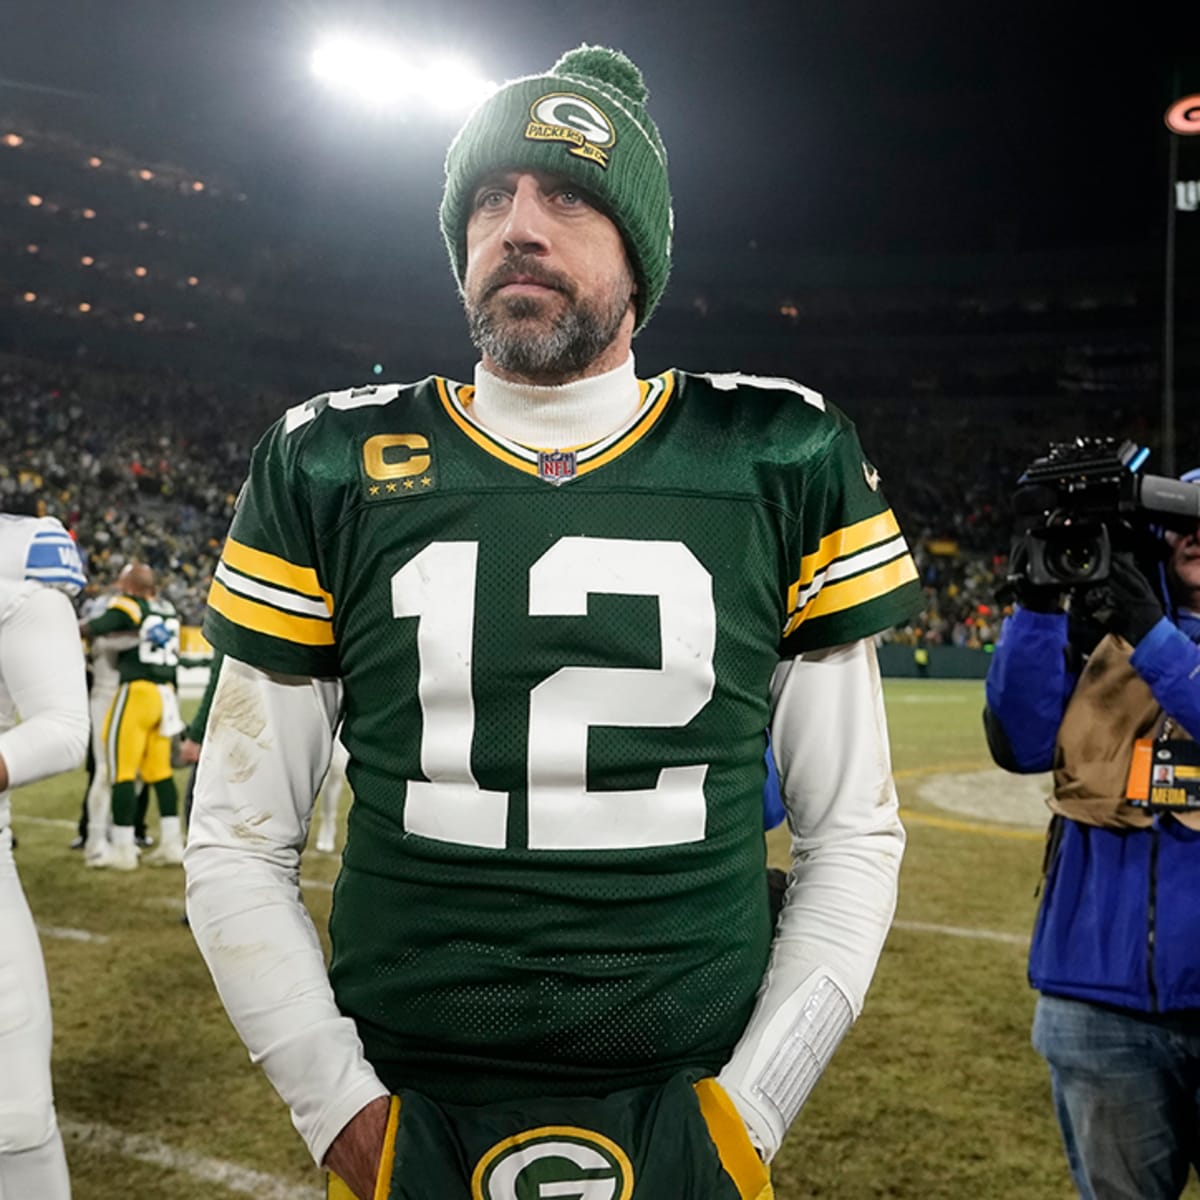 NFL Fans Speculate on Aaron Rodgers's Future After His Jersey Decision  Sunday Night - Sports Illustrated